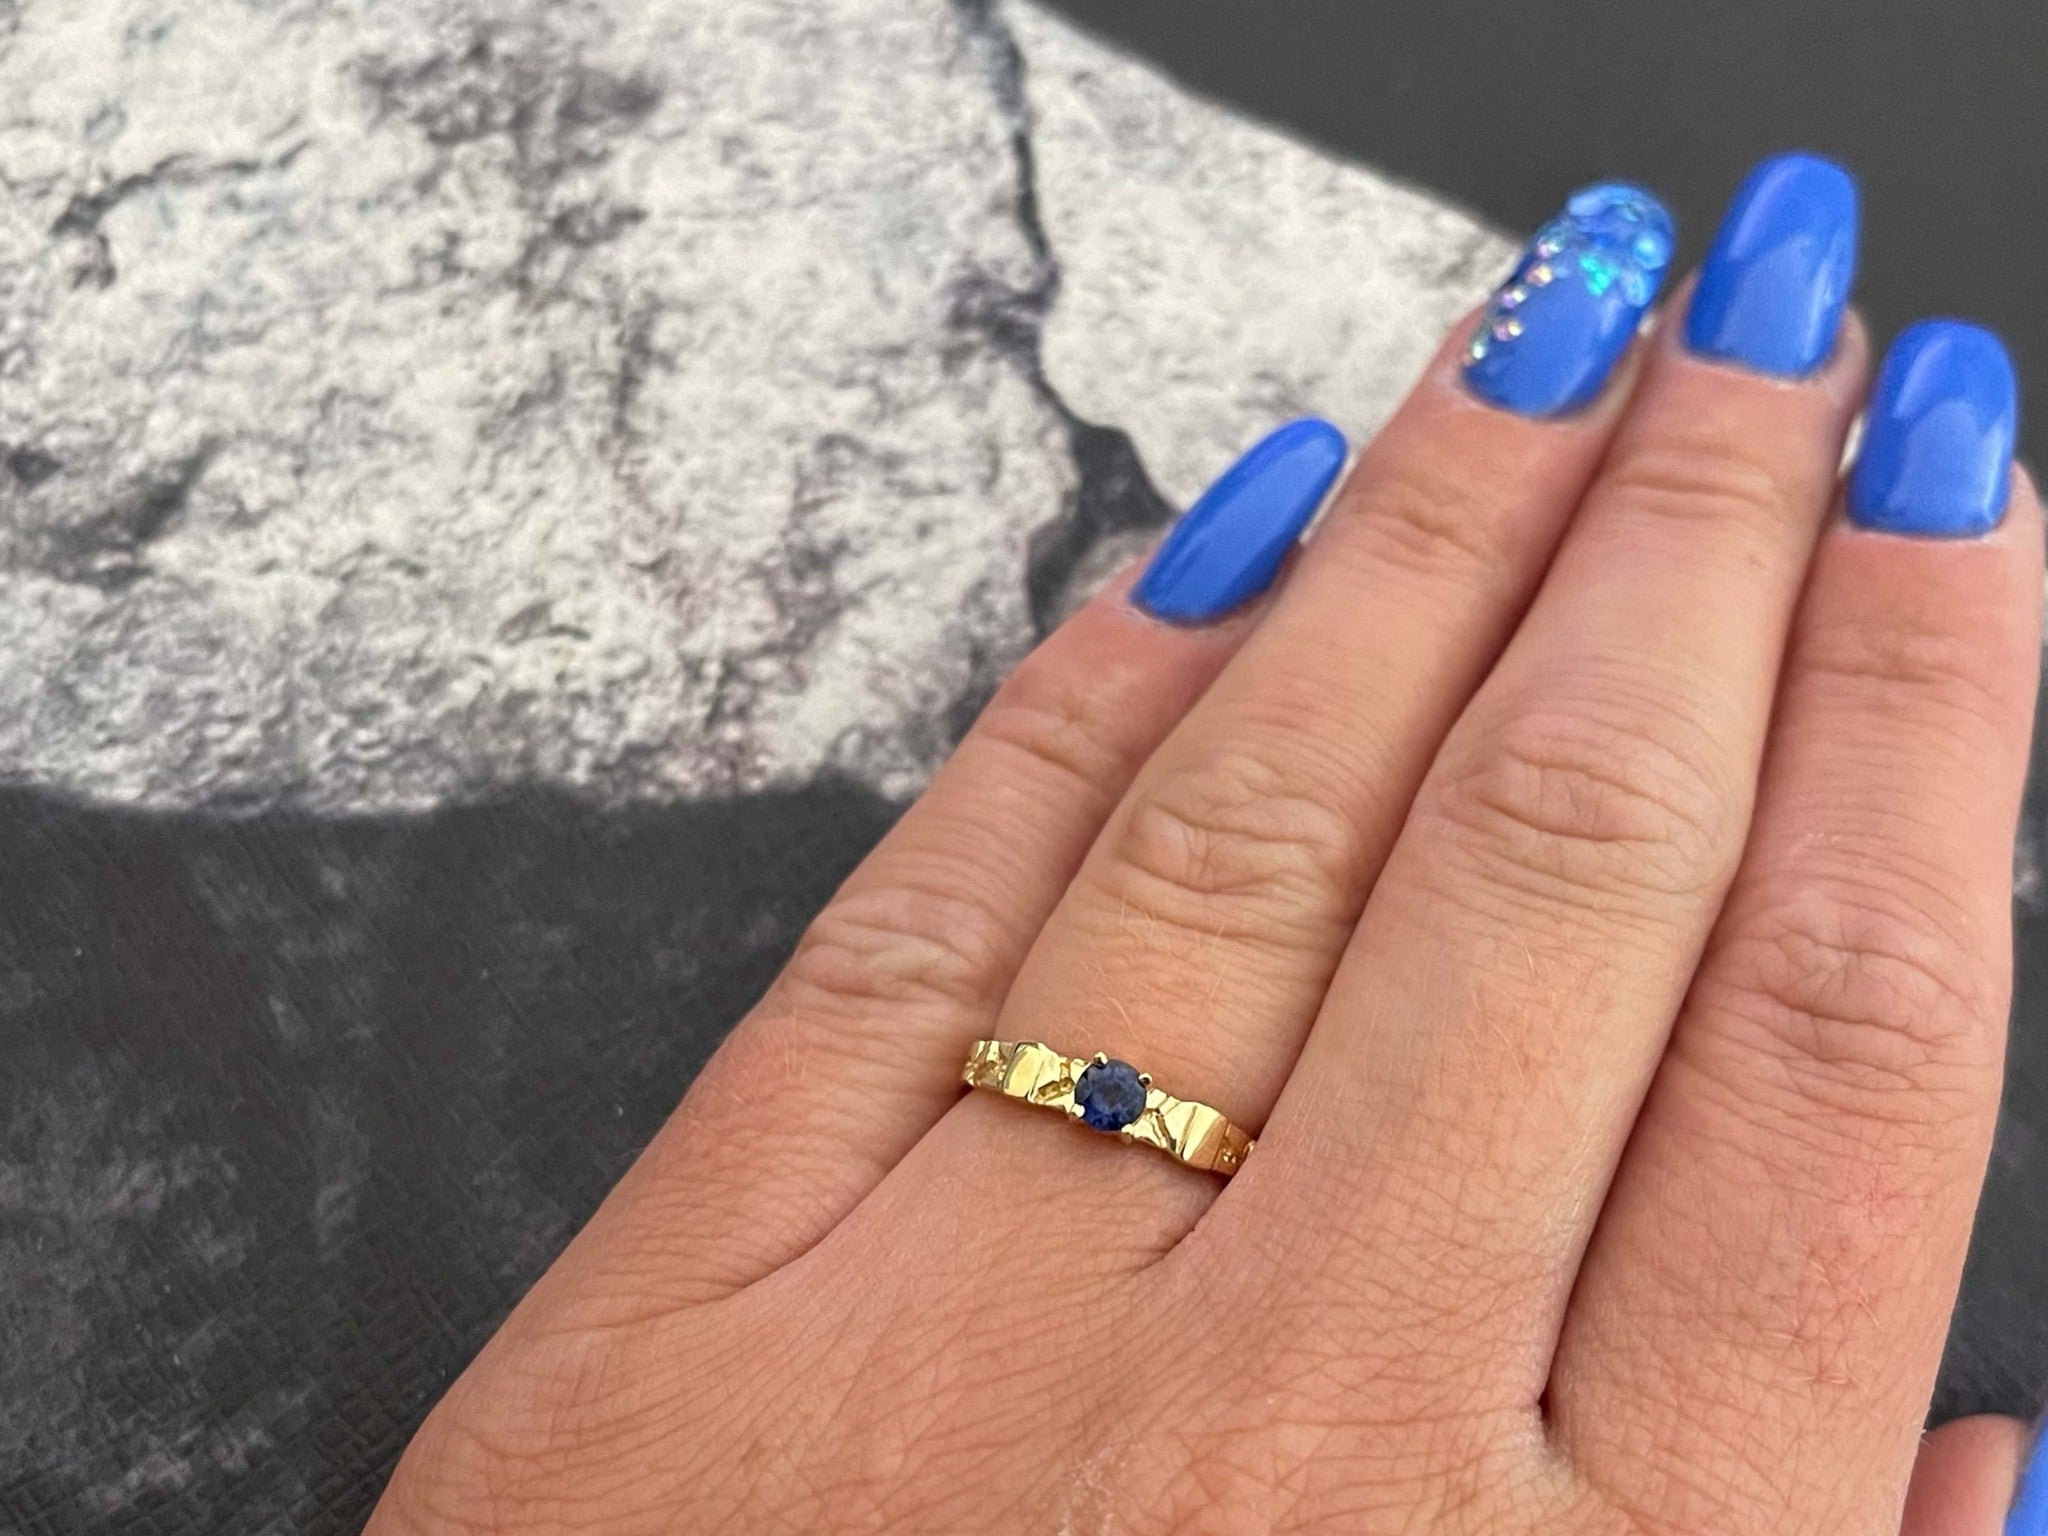 Sapphire Band Ring in 14k Yellow Gold